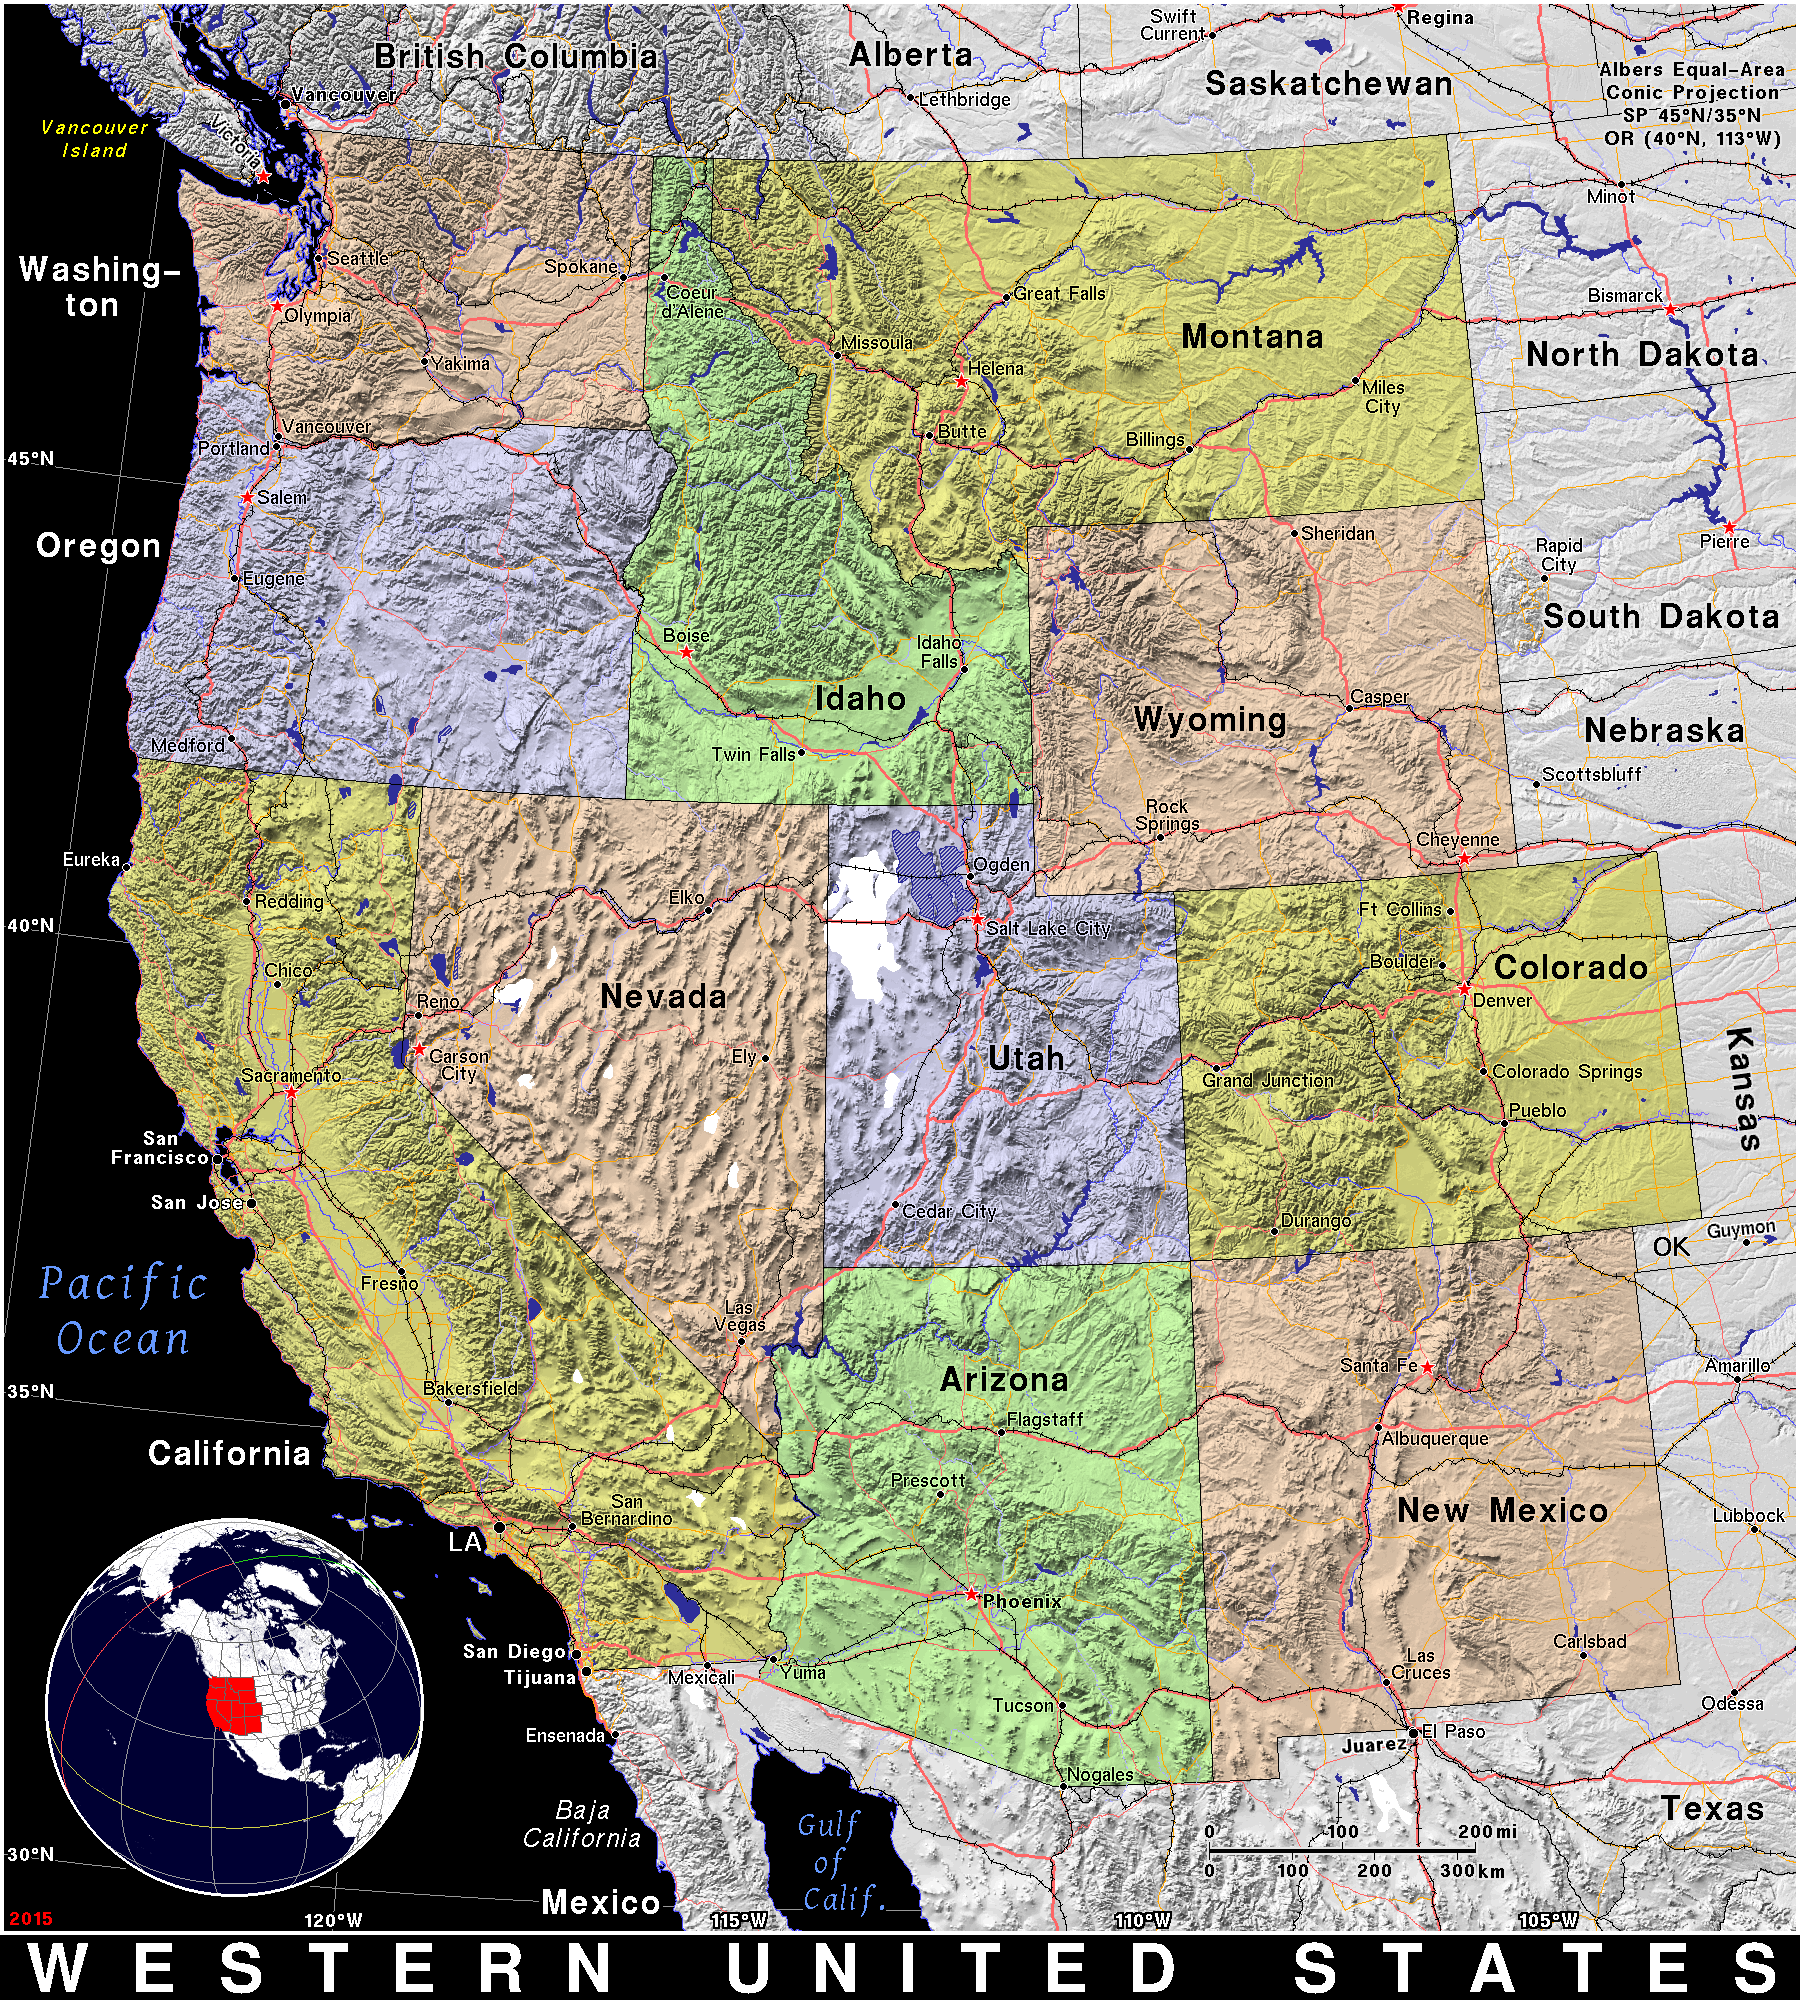 Western United States Public Domain Maps By Pat The Free Open